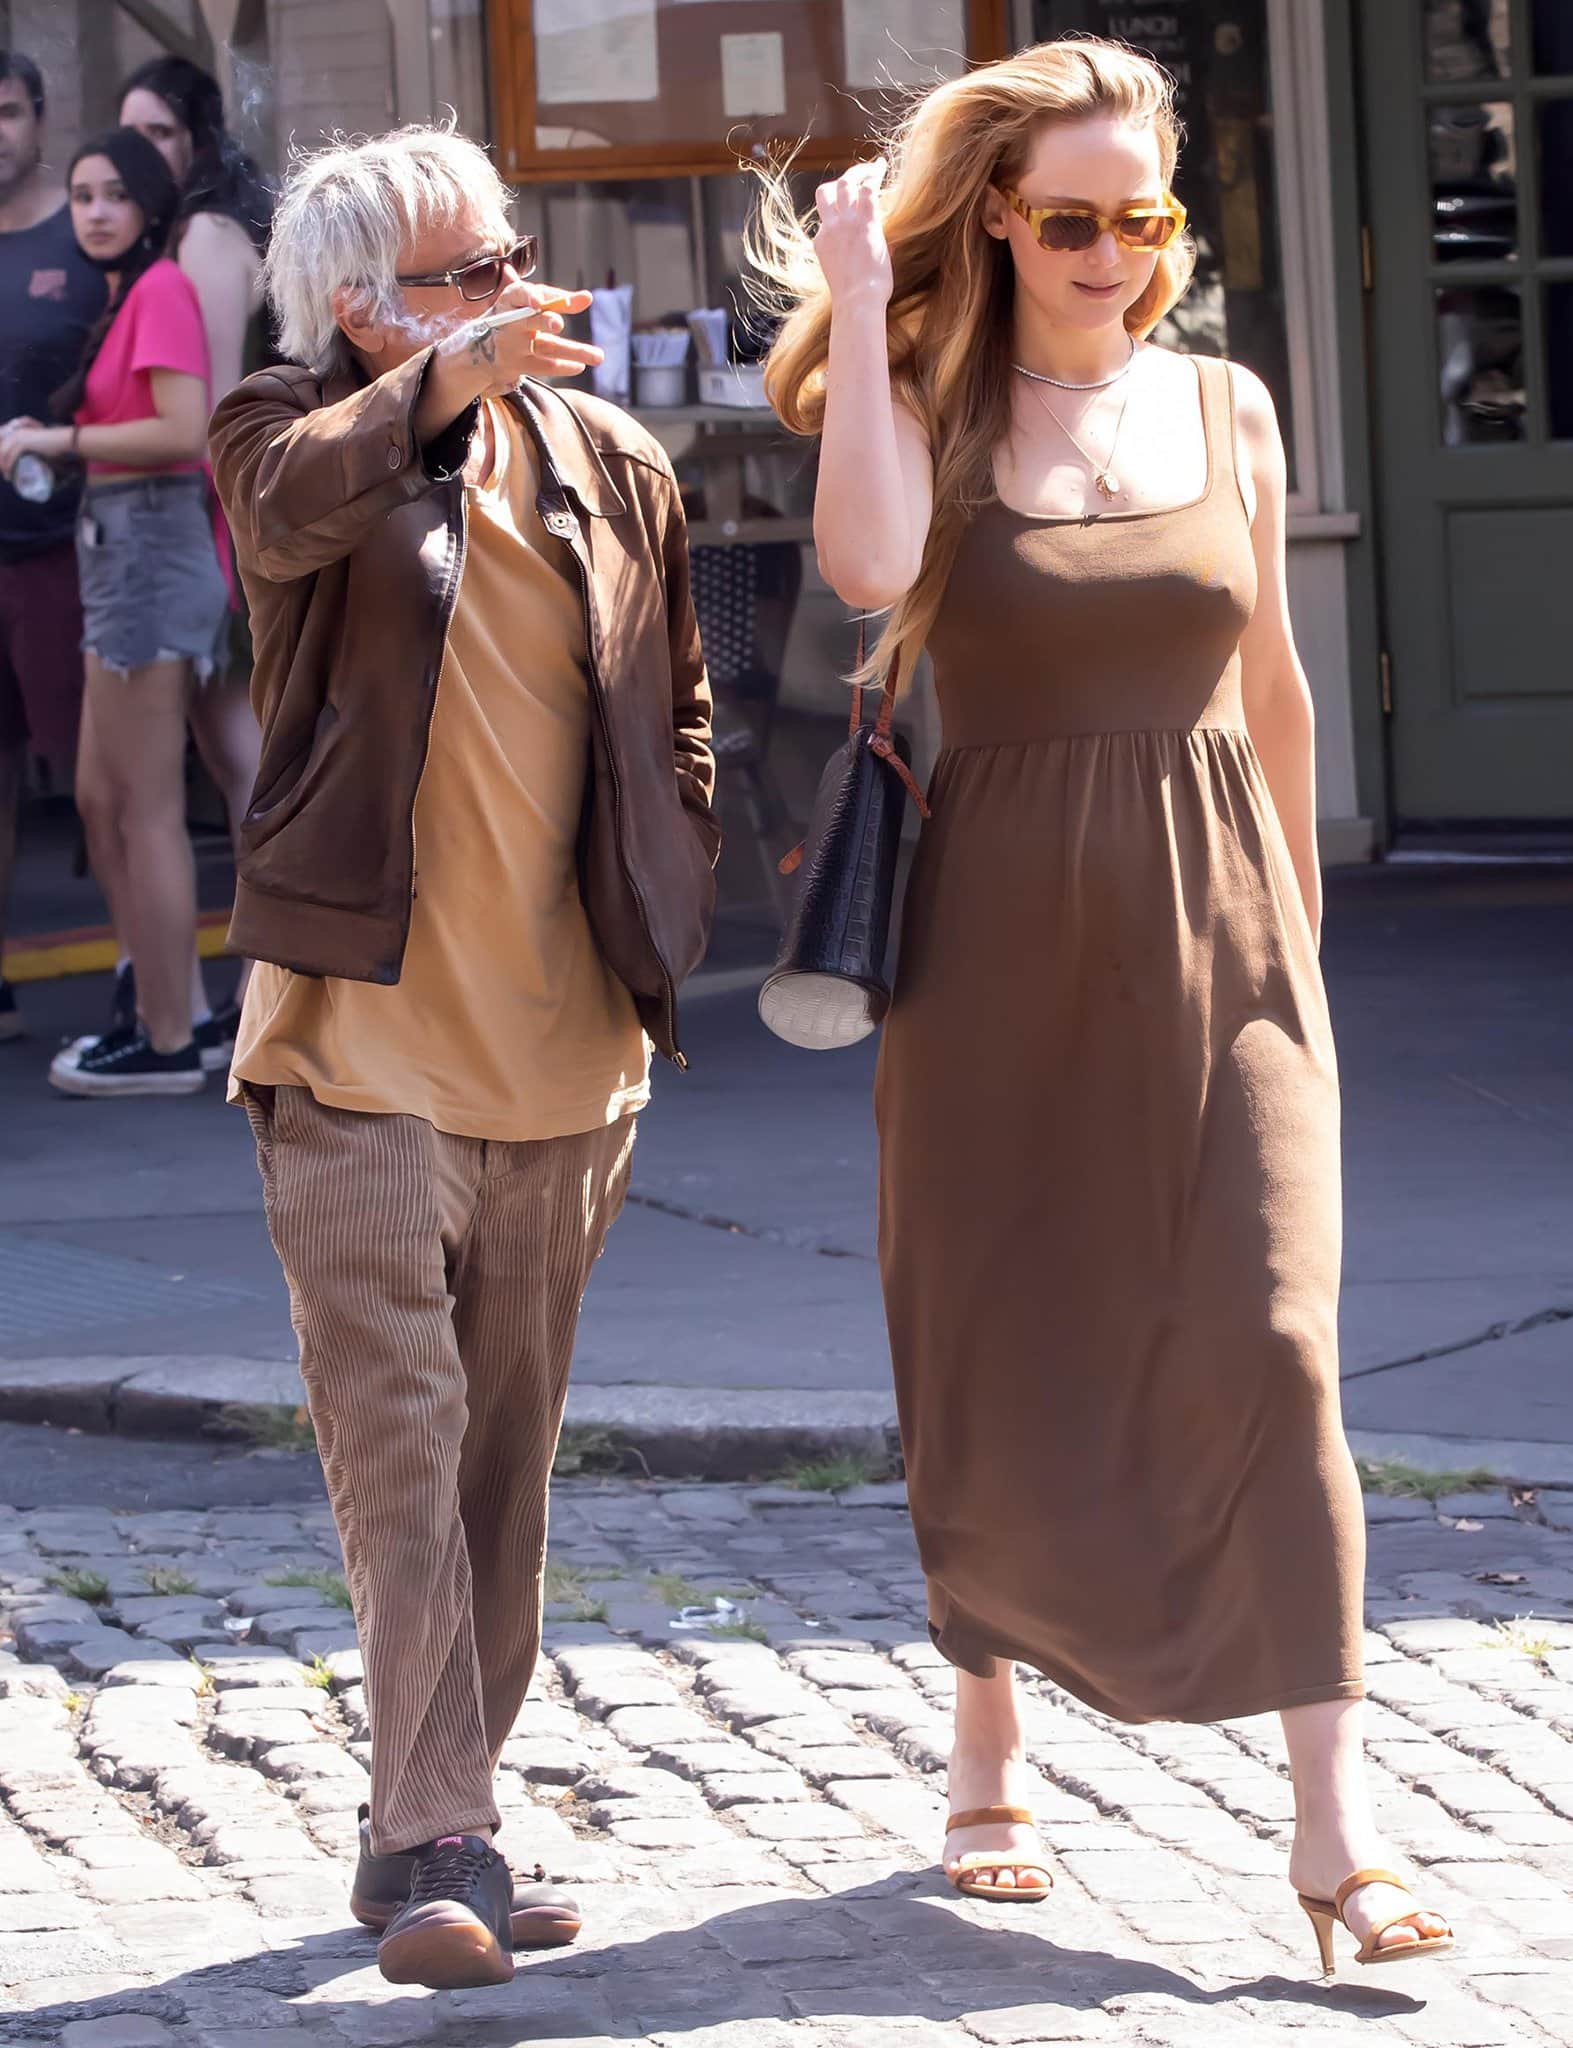 Leos Carax and Jennifer Lawrence coordinate in brown outfits for the lunch out